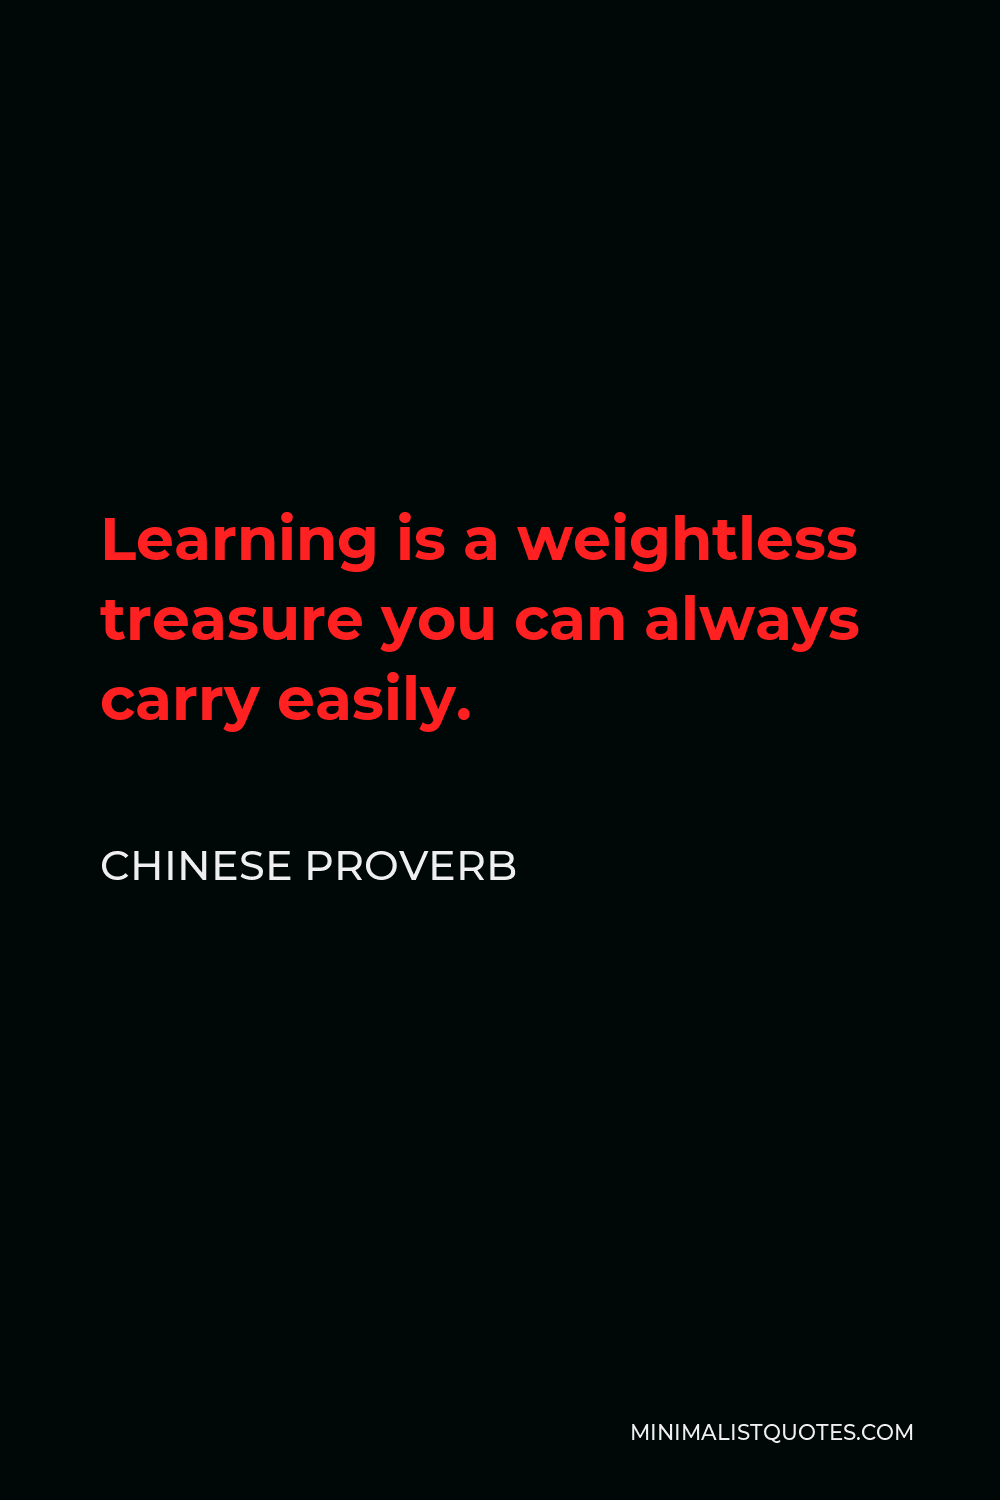 Chinese Proverb Quote - Learning is a weightless treasure you can always carry easily.